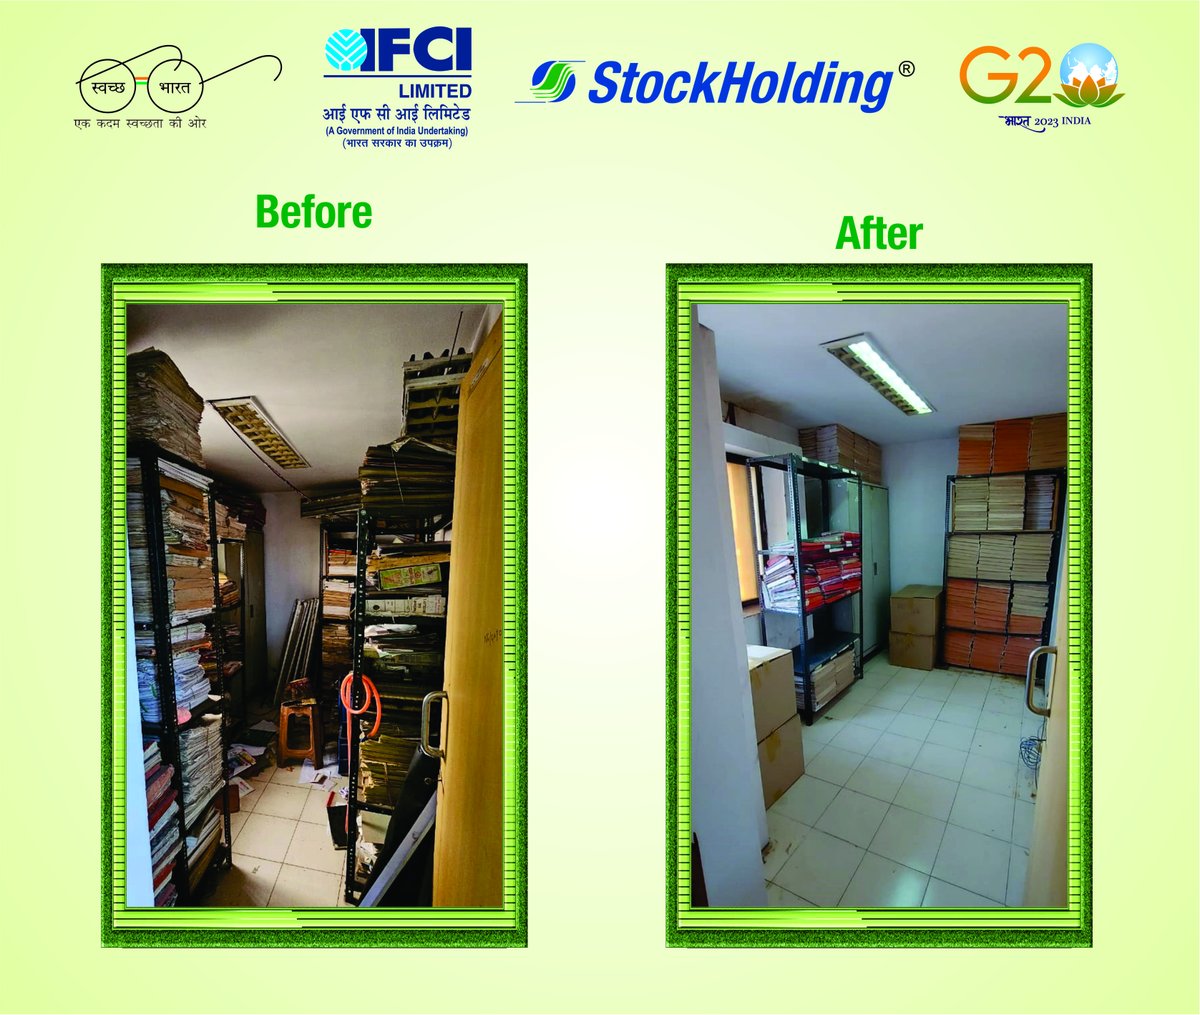 Under Special Campaign 3.0, IFCI’s subsidiary StockHolding’s participation in a cleanliness activity at the Dhantoli Branch Office in Nagpur. #SwachhBharat #GarbageFreeIndia #SHS2023 @DFS_India @SwachhBharatGov @swachhbharat @PMOIndia @DARPG_GoI